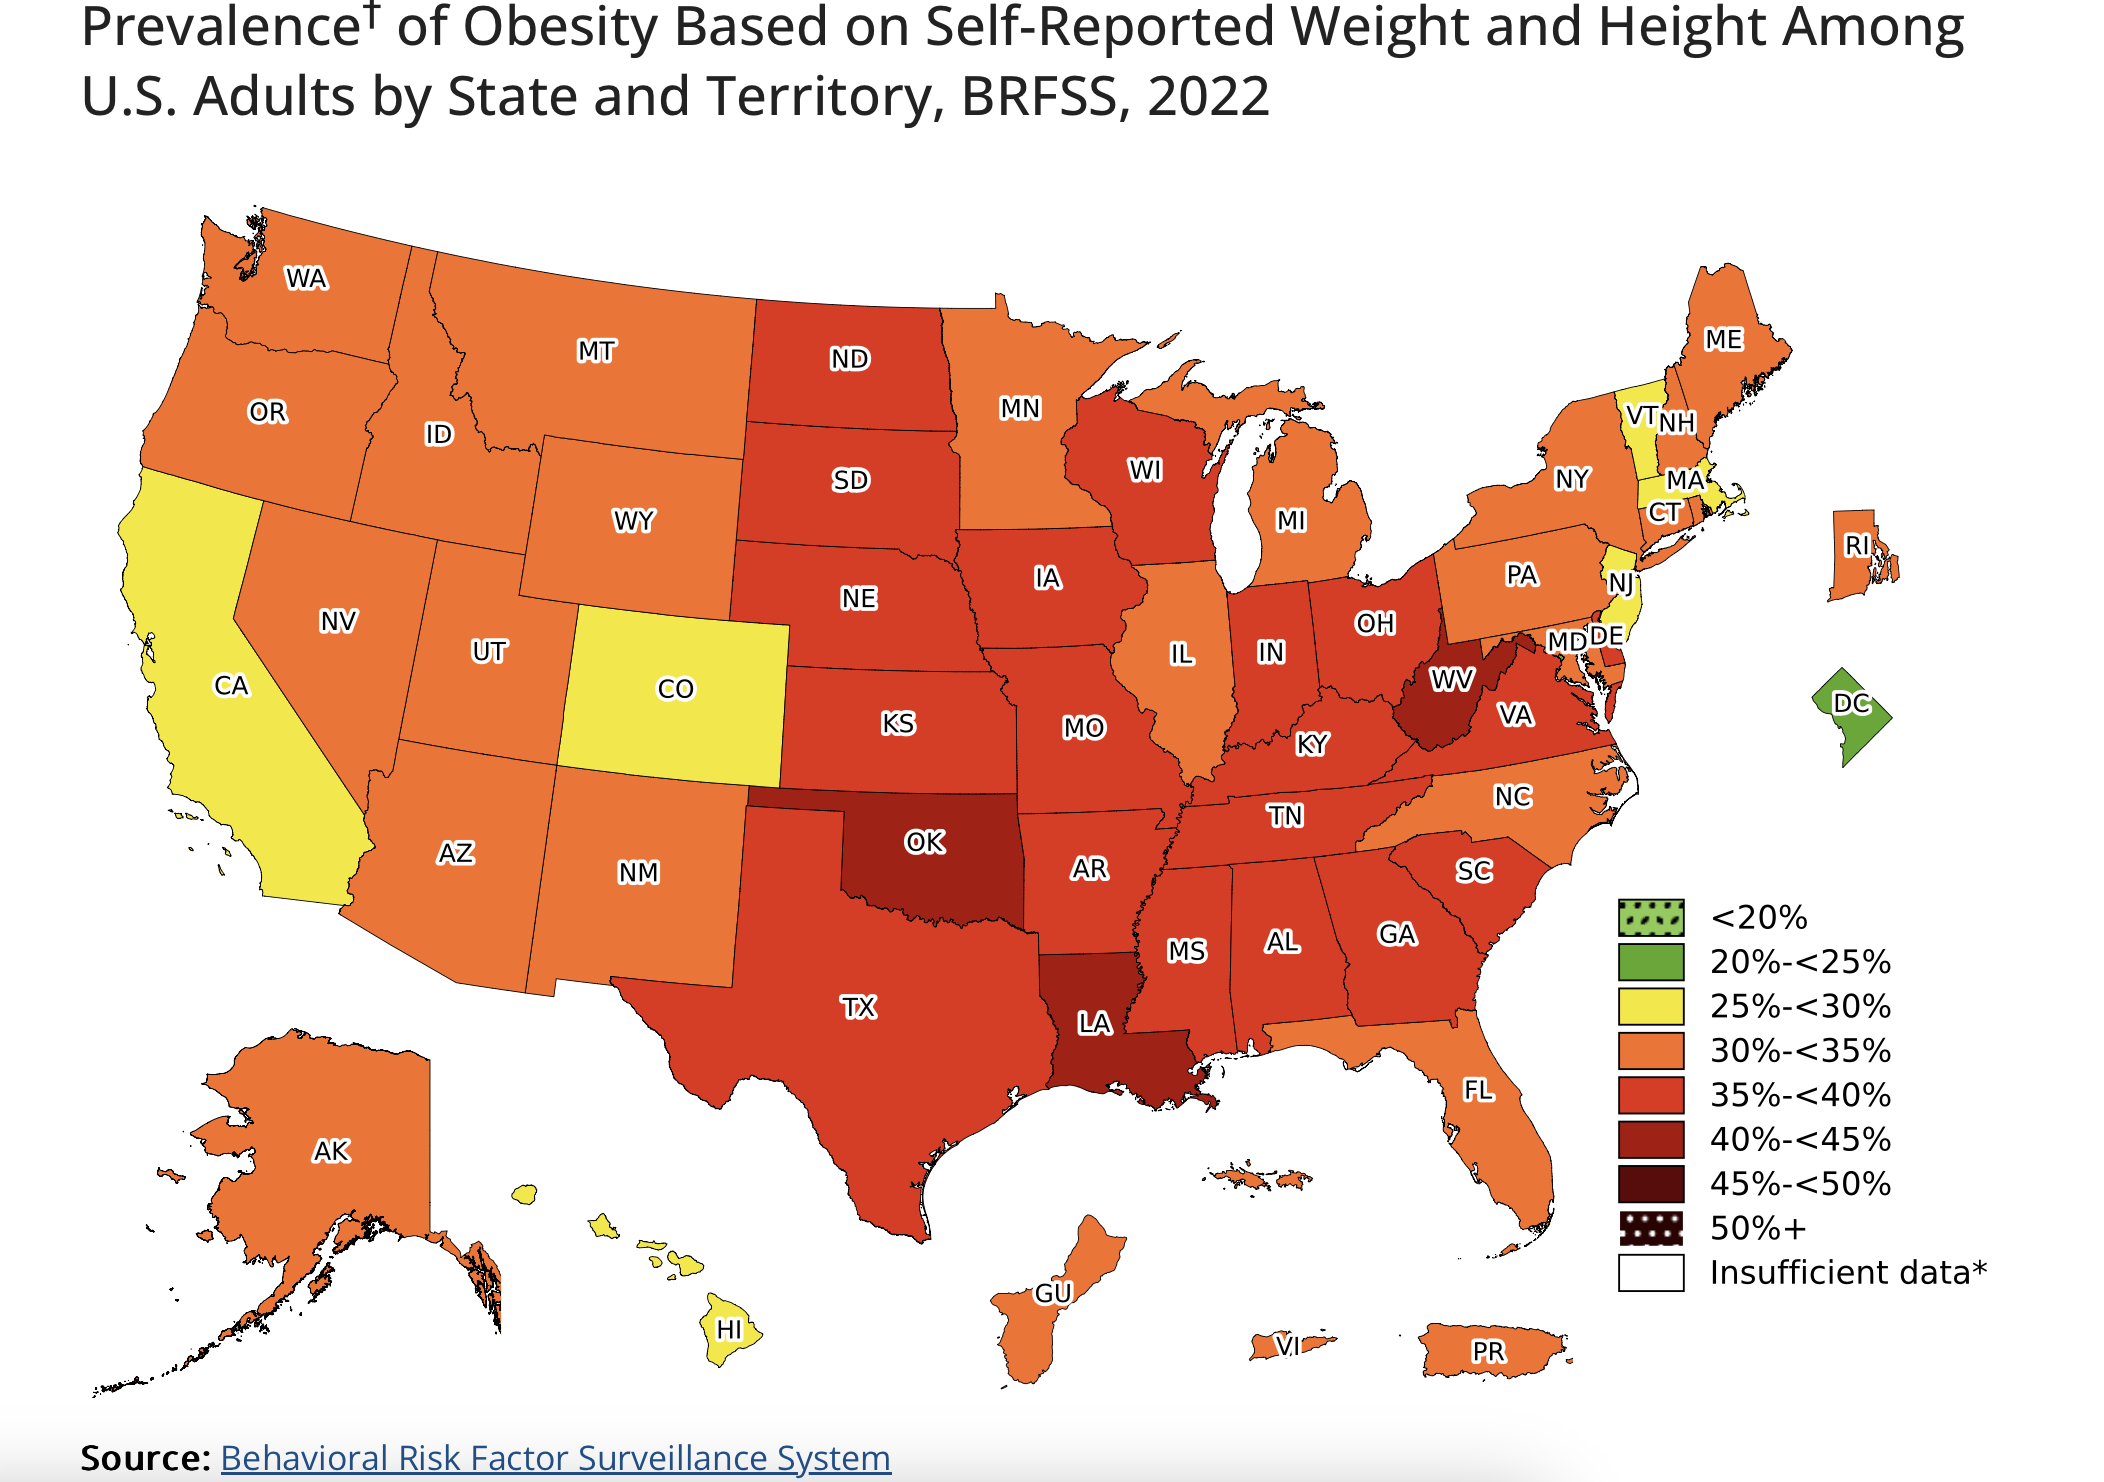 Prevalence† of Obesity Based on Self-Reported Weight and Height Among U.S. Adults